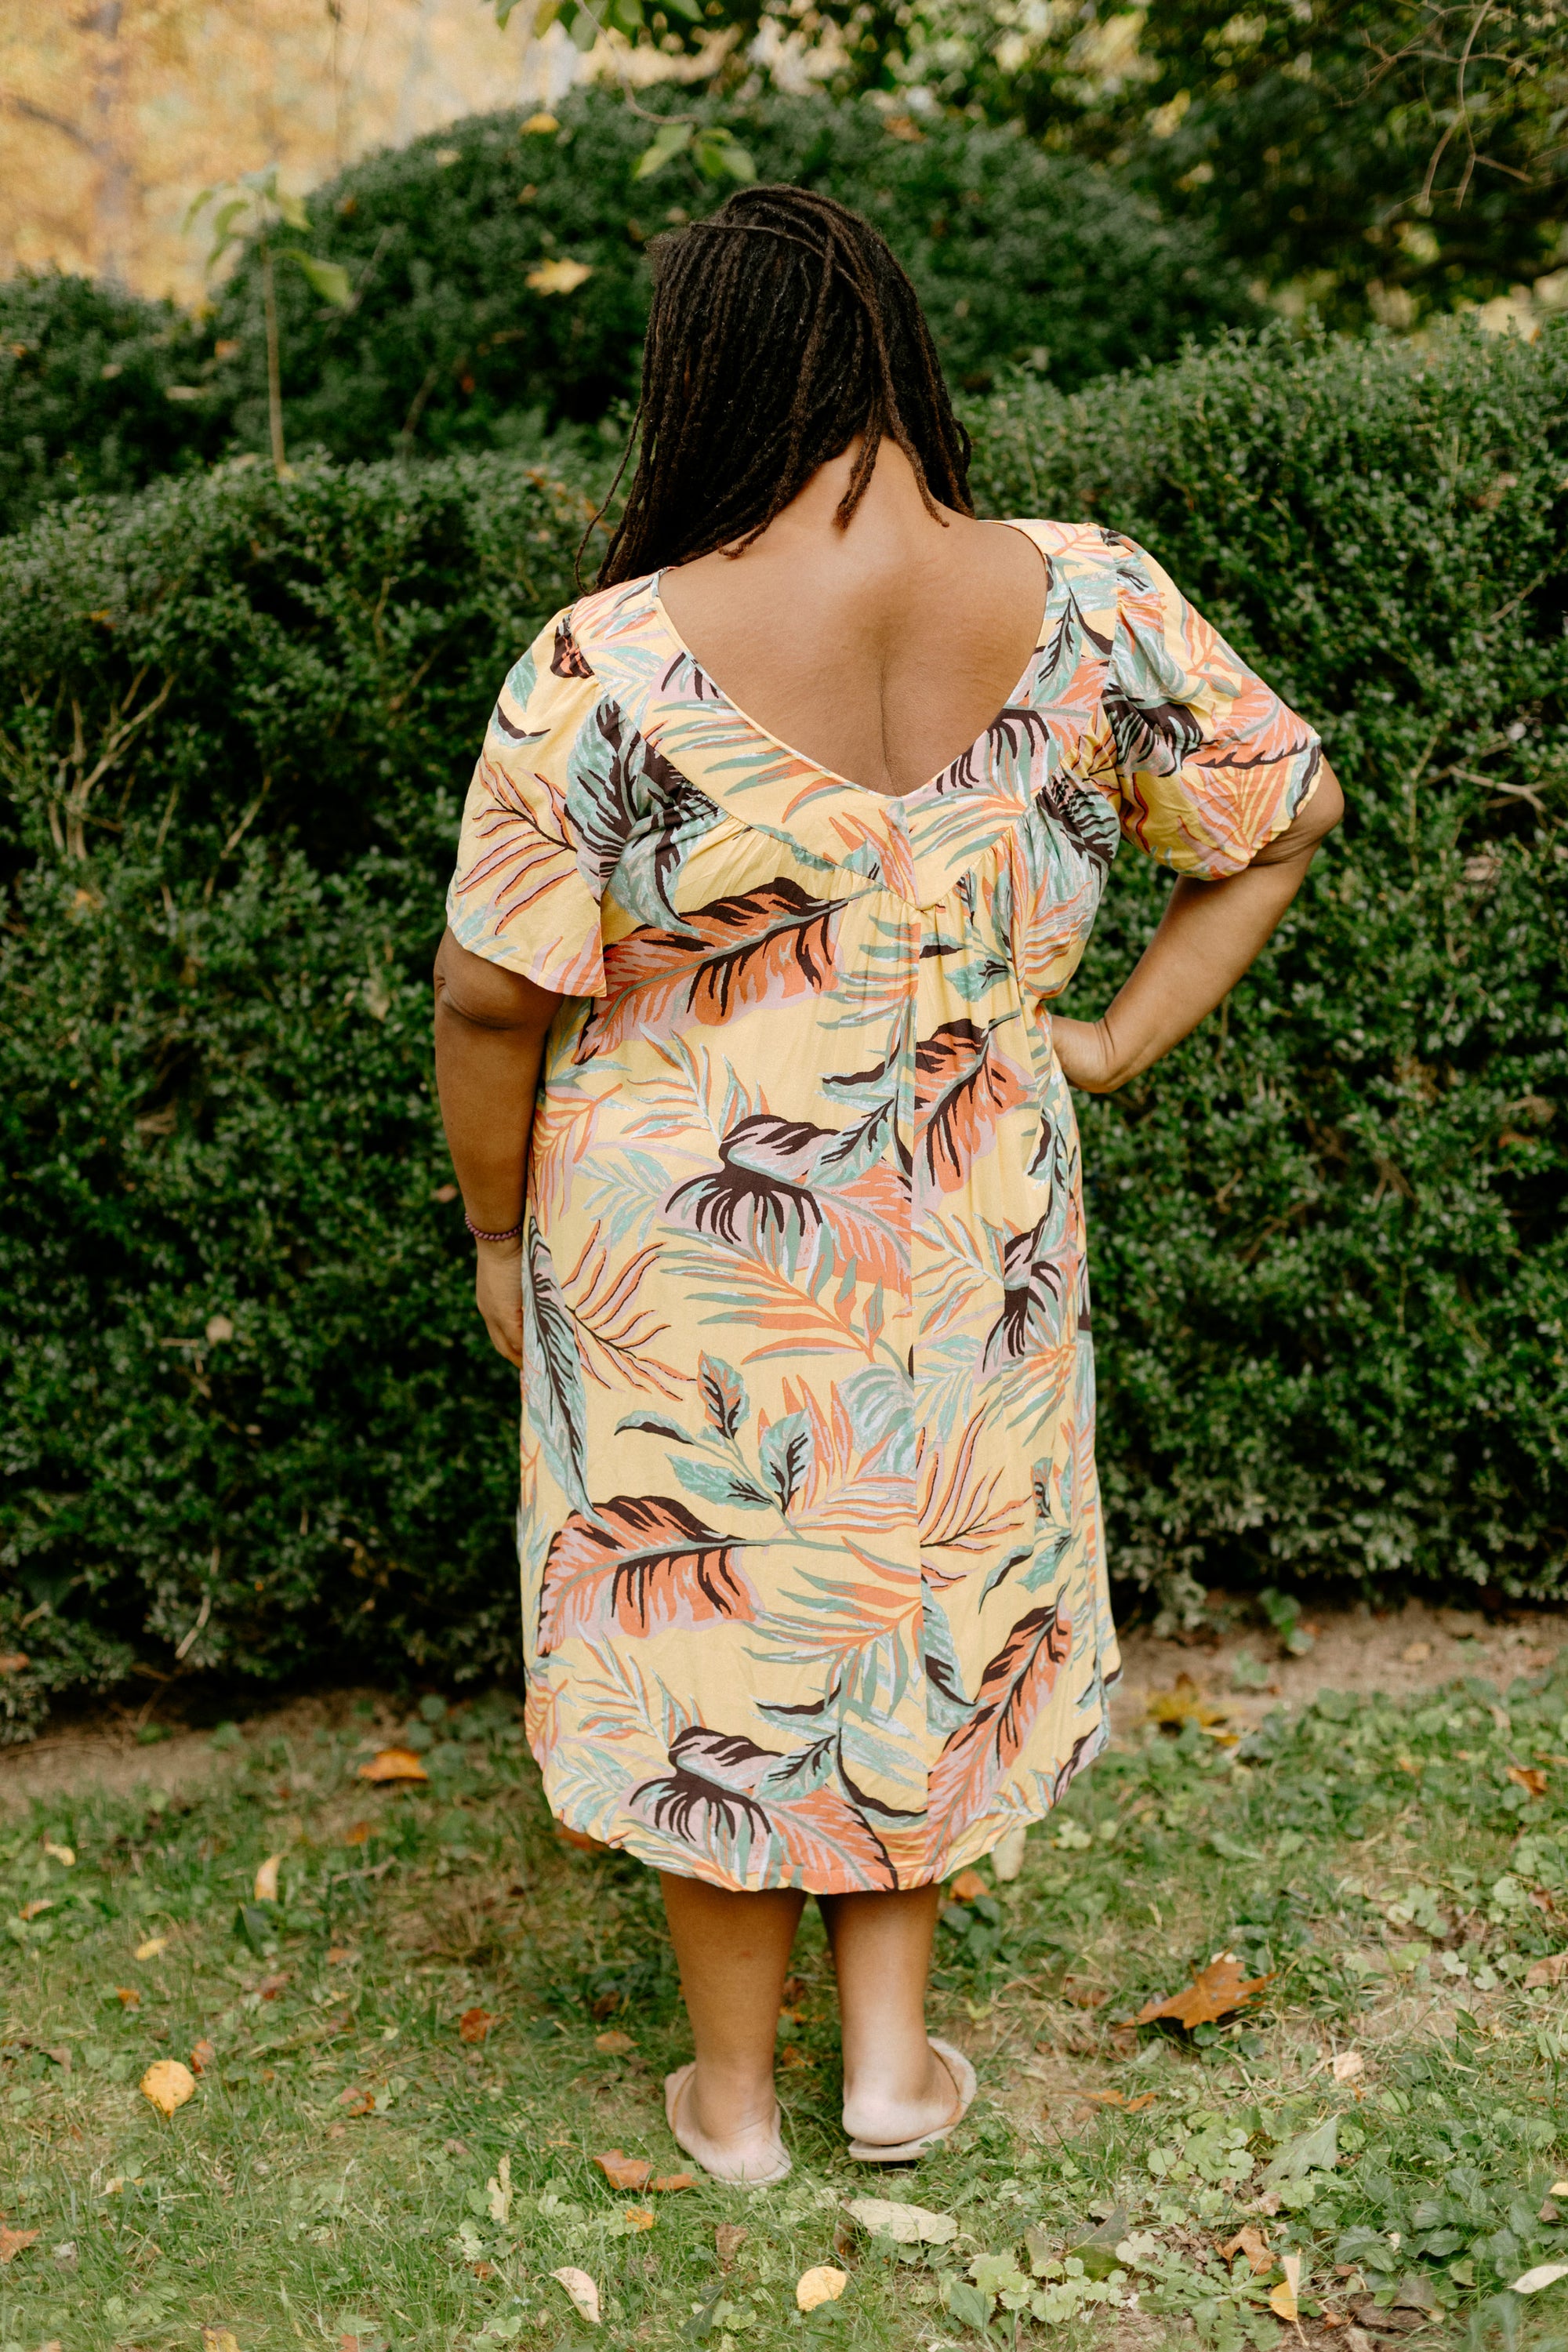 Back view of Black woman wearing a size 2XL knee-length, short-sleeve, yellow muumuu with orange and green palm fronds on it.  